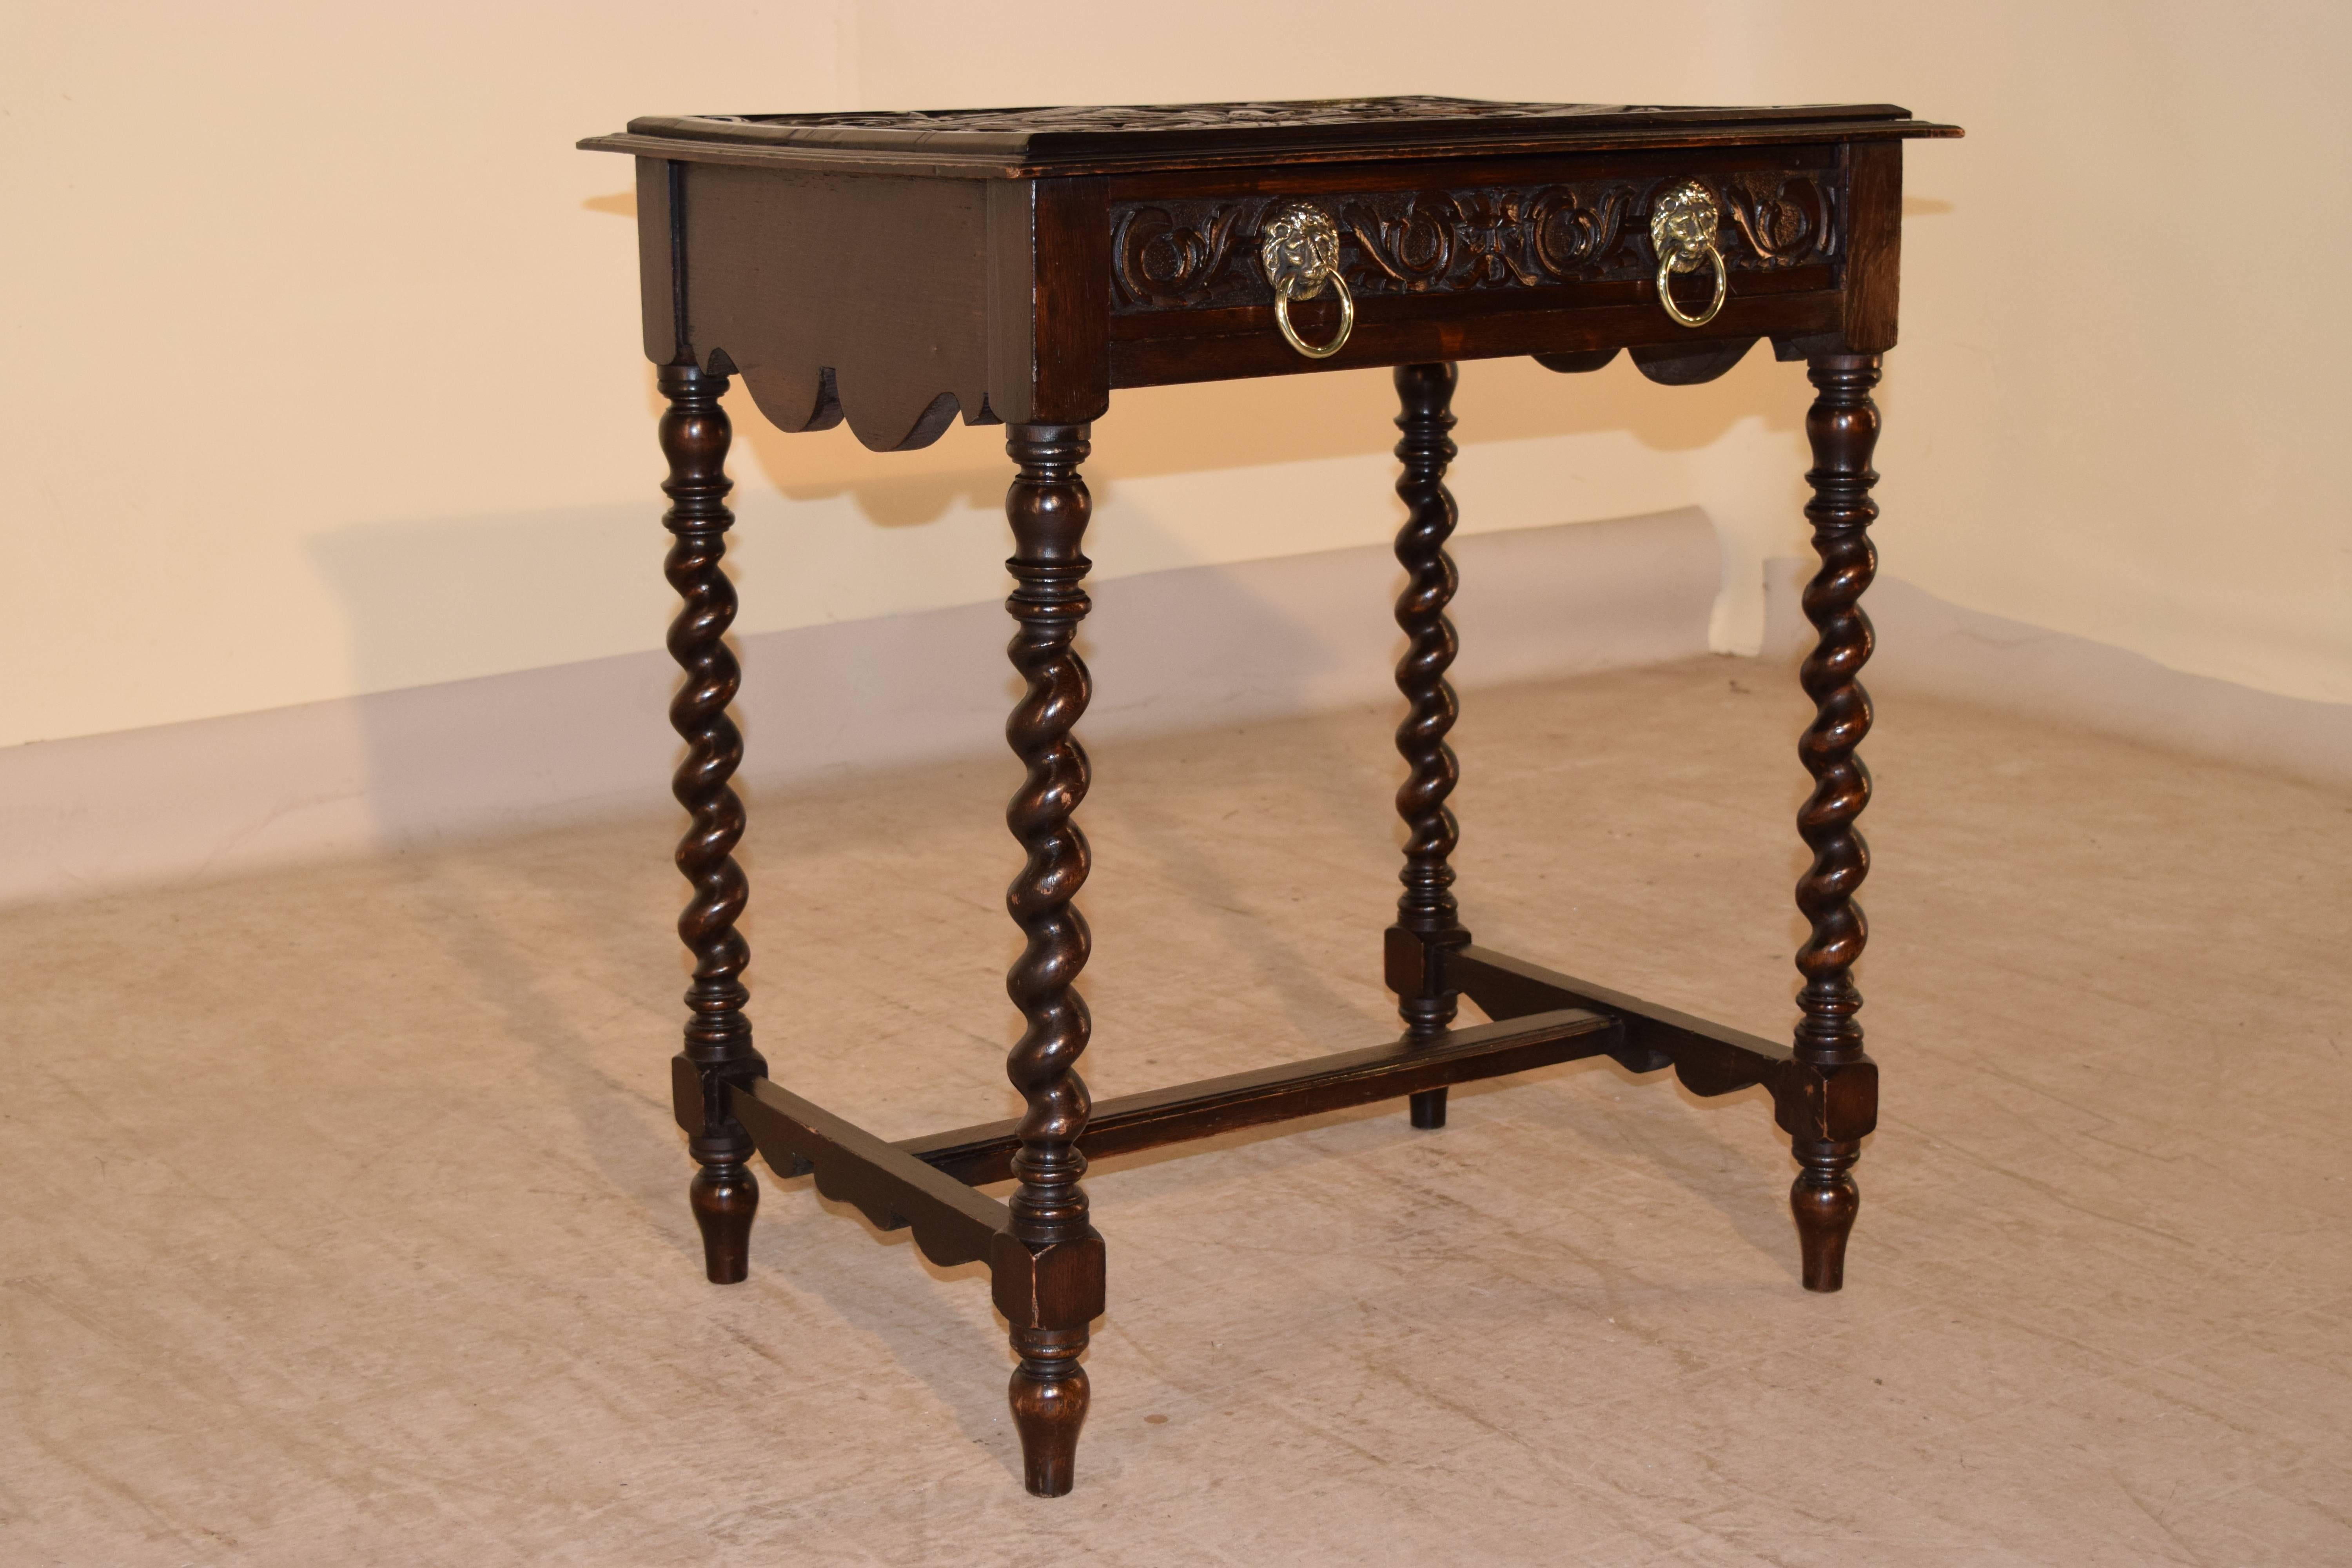 19th century, English side table made from oak. The top is heavily carved and has a stepped molded edge. There is a single drawer with a carved drawer front with lion ring pulls and scalloped aprons on the sides. The legs are hand turned barely